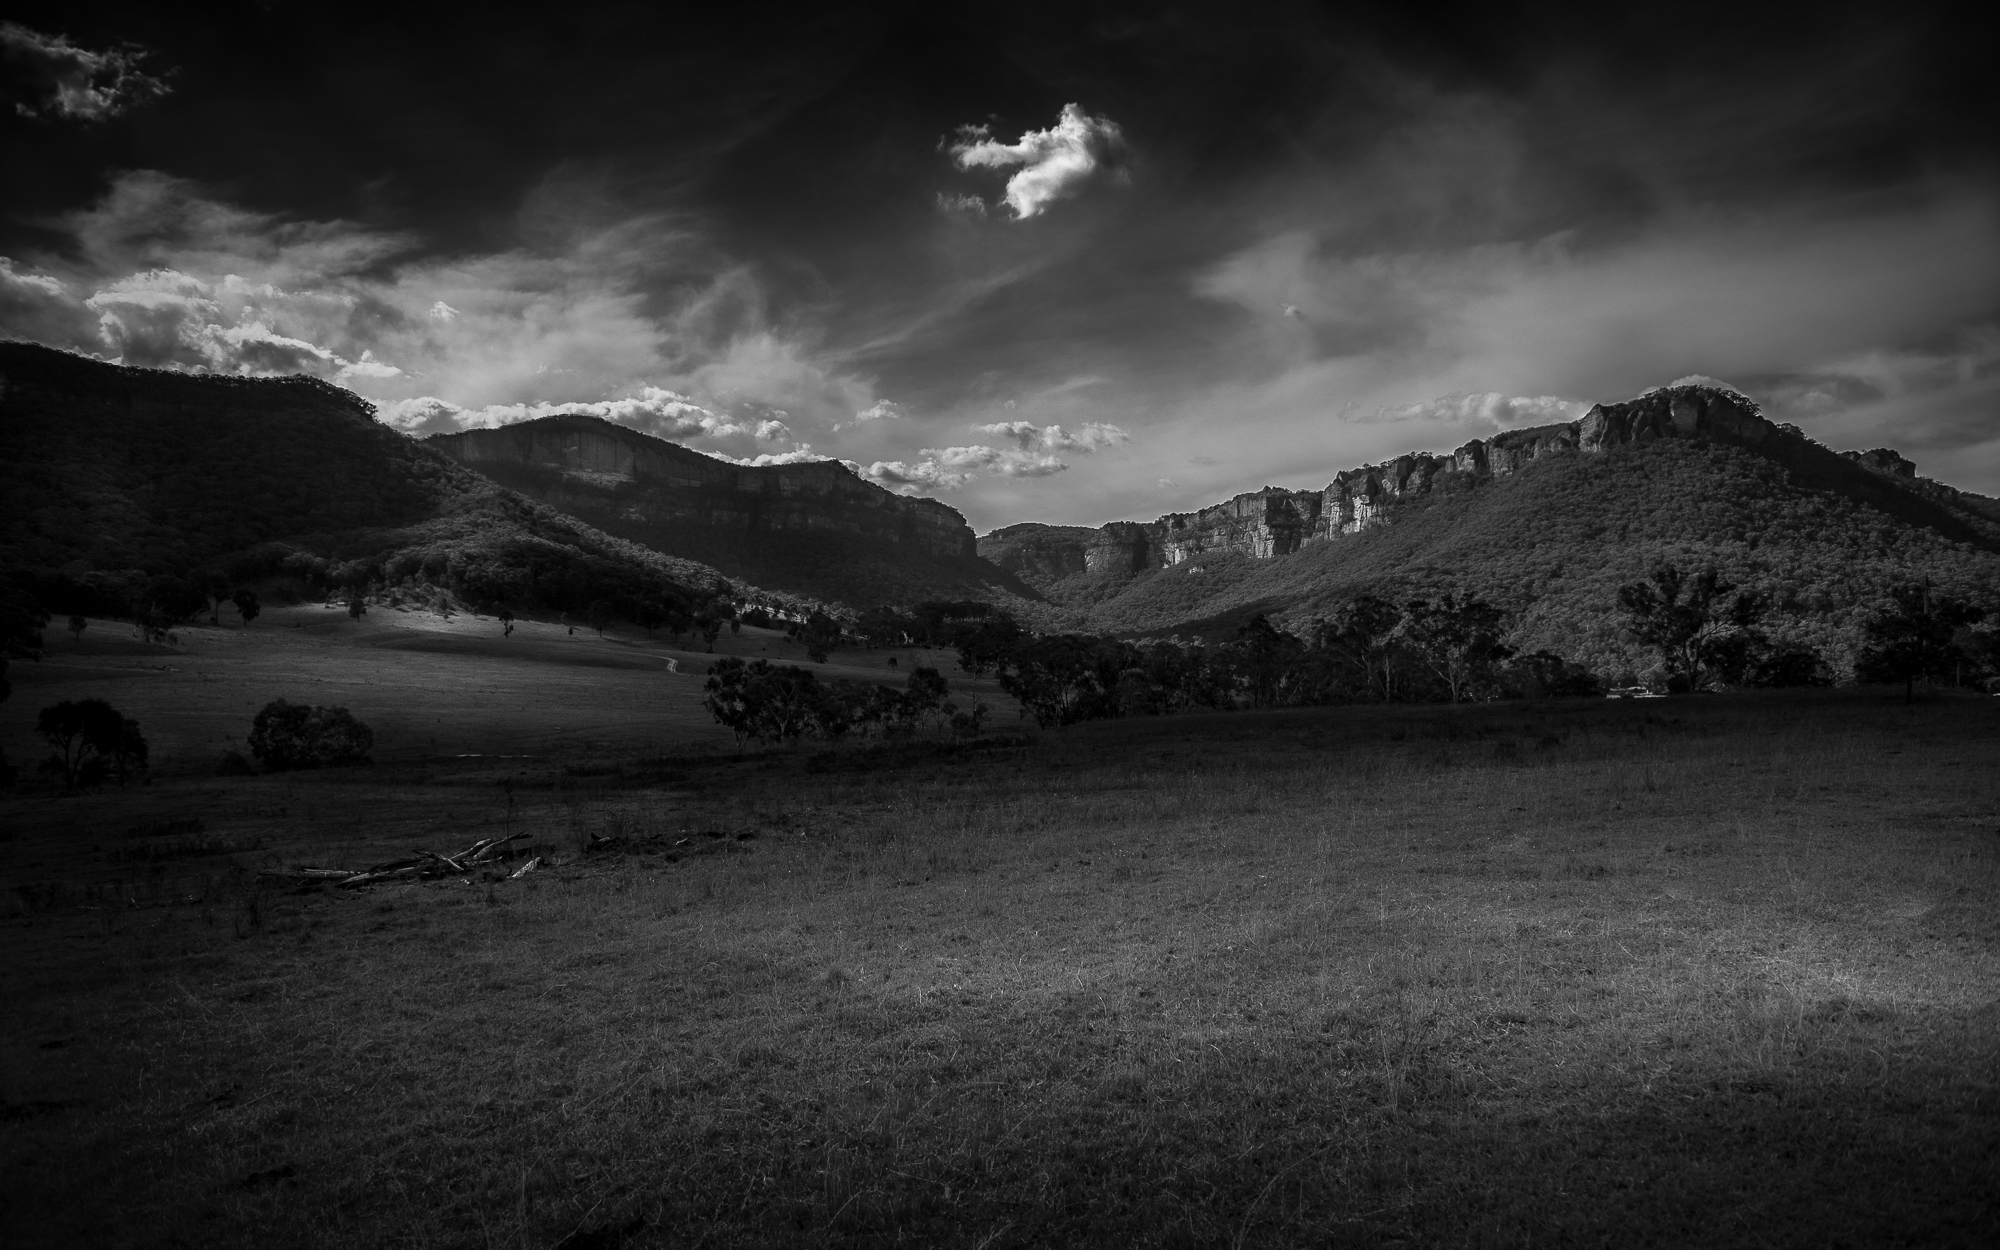 Dark and moody black and white landscape photograph showing mountain range surrounding rolling farmland